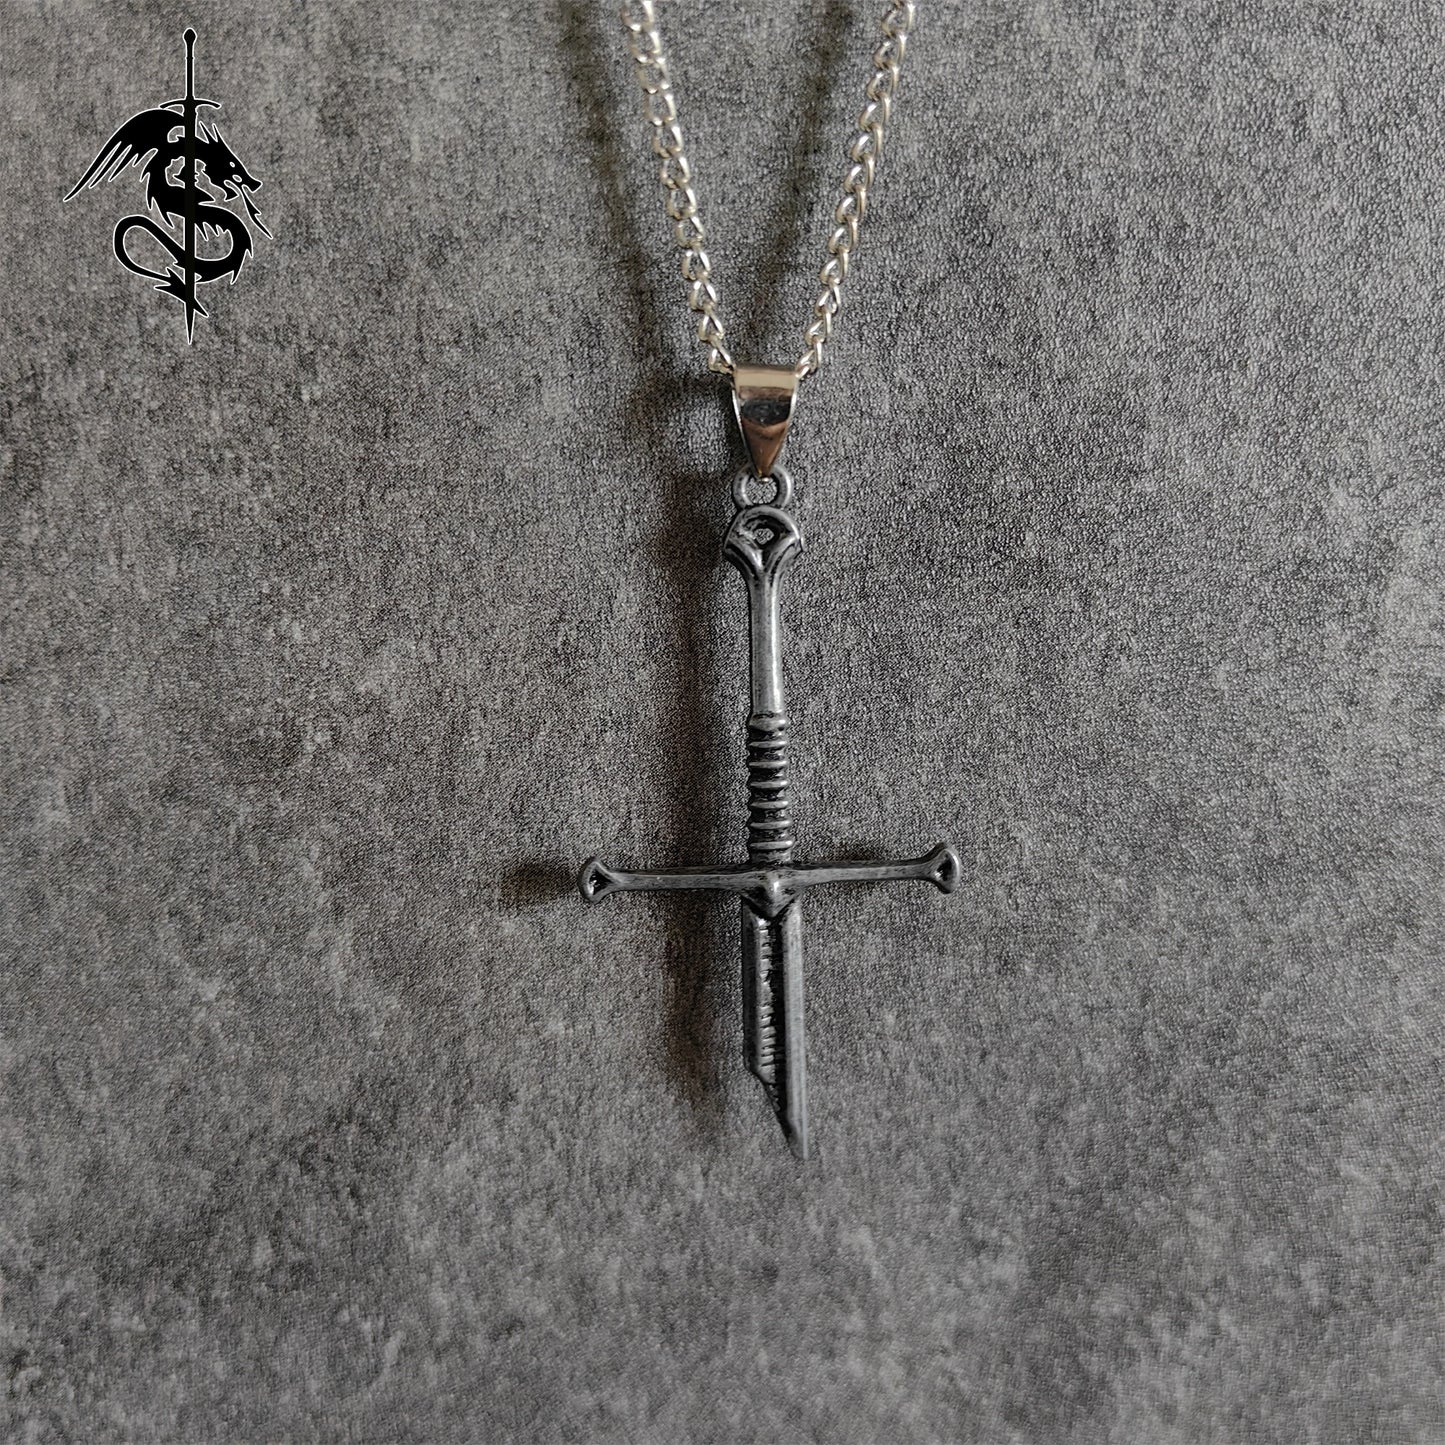 Narsil Holy Sword Pendant Middle Age Broken Holy Sword Necklace